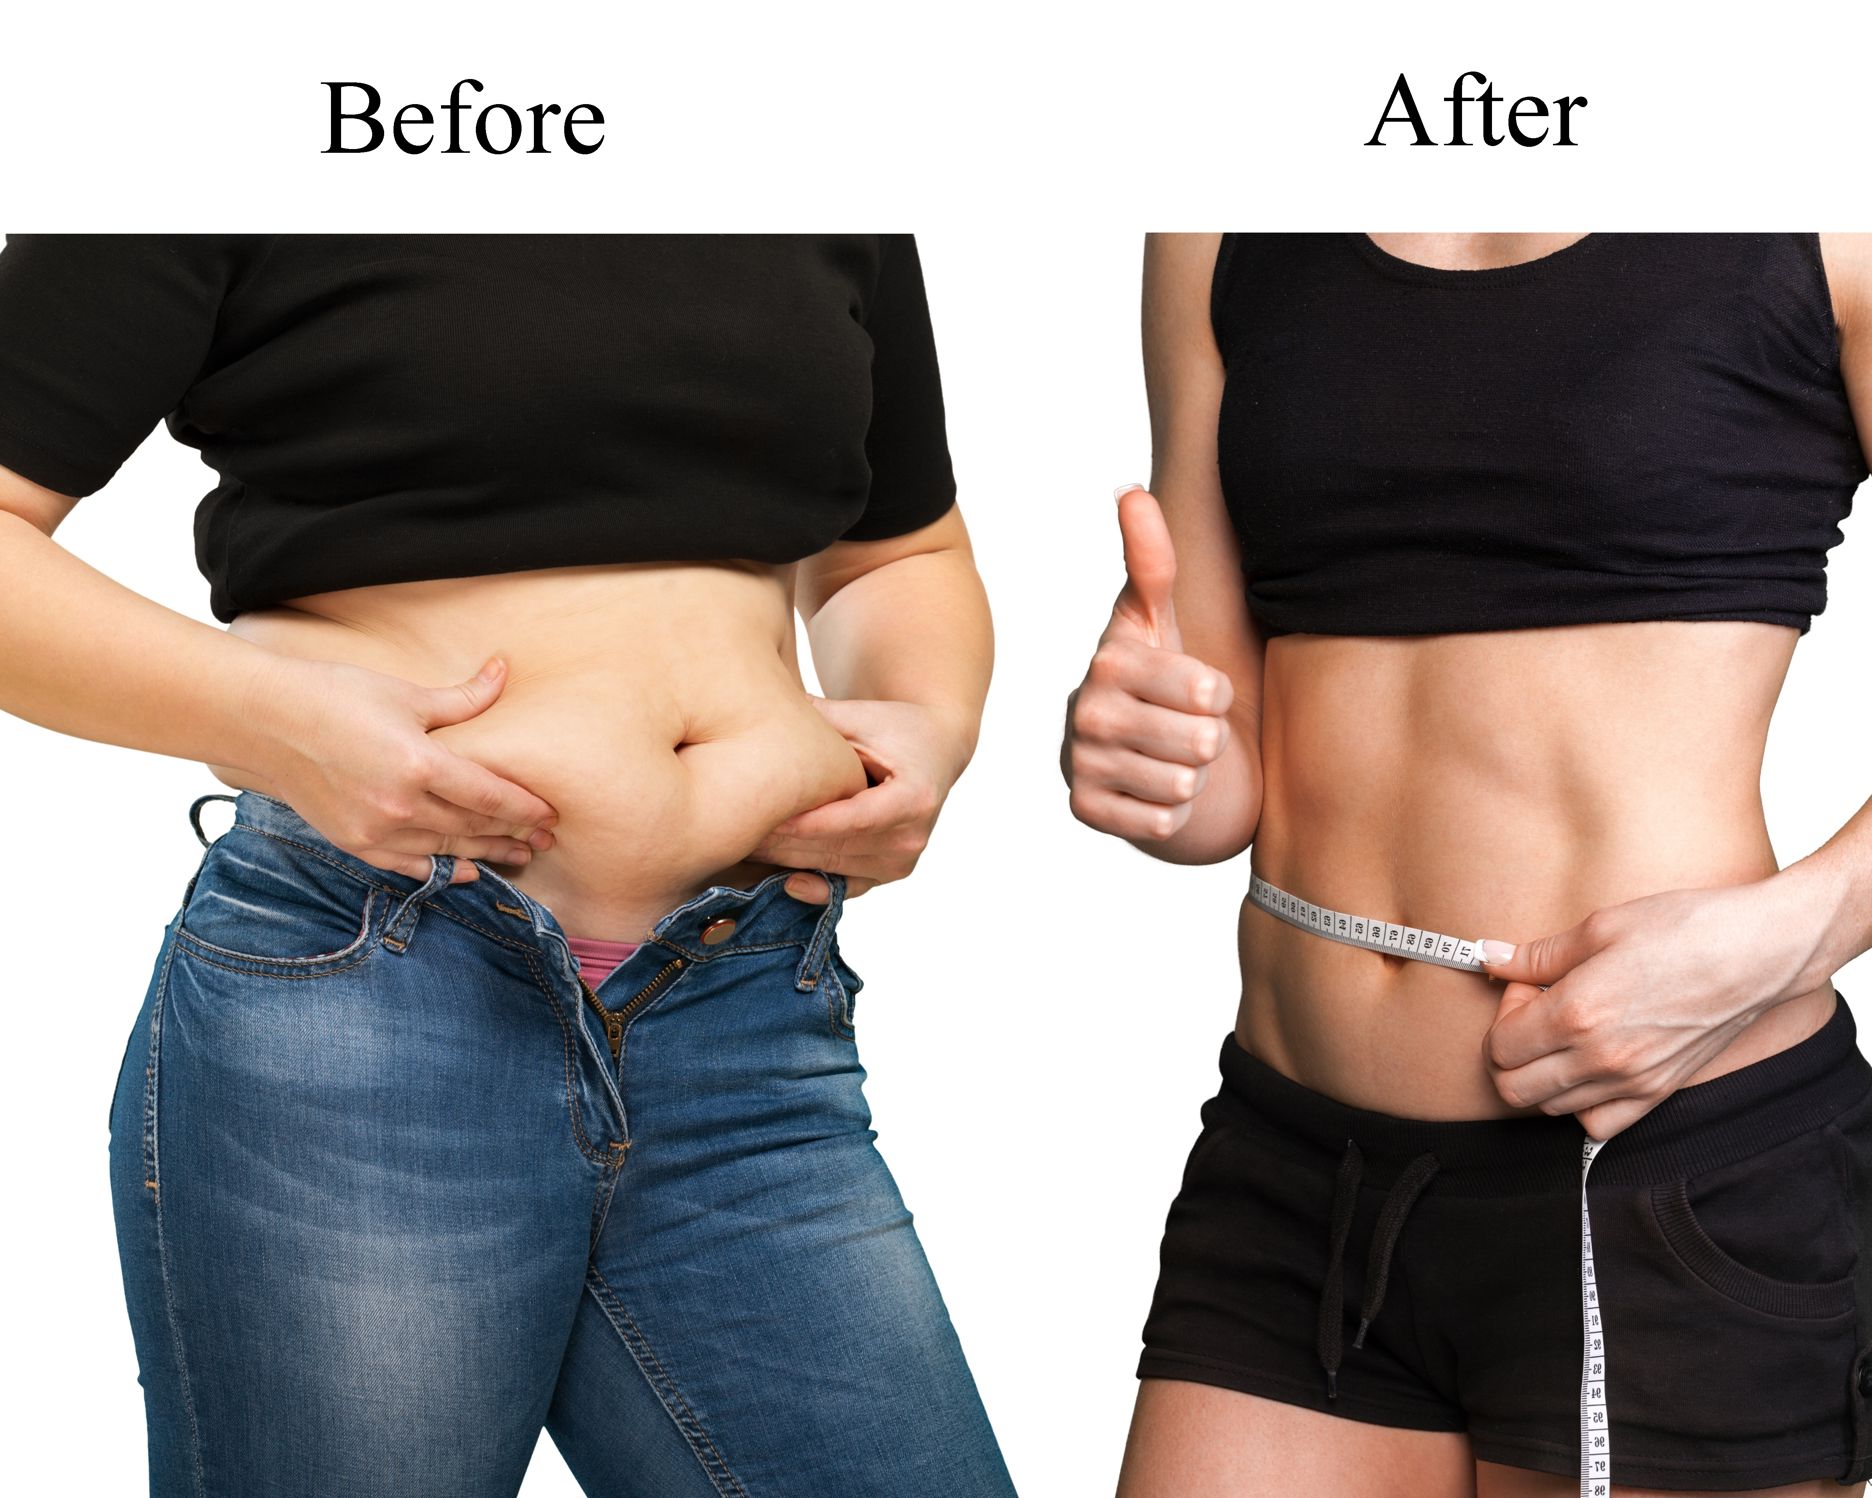 woman-s-body-before-after-diet-close-up.jpg